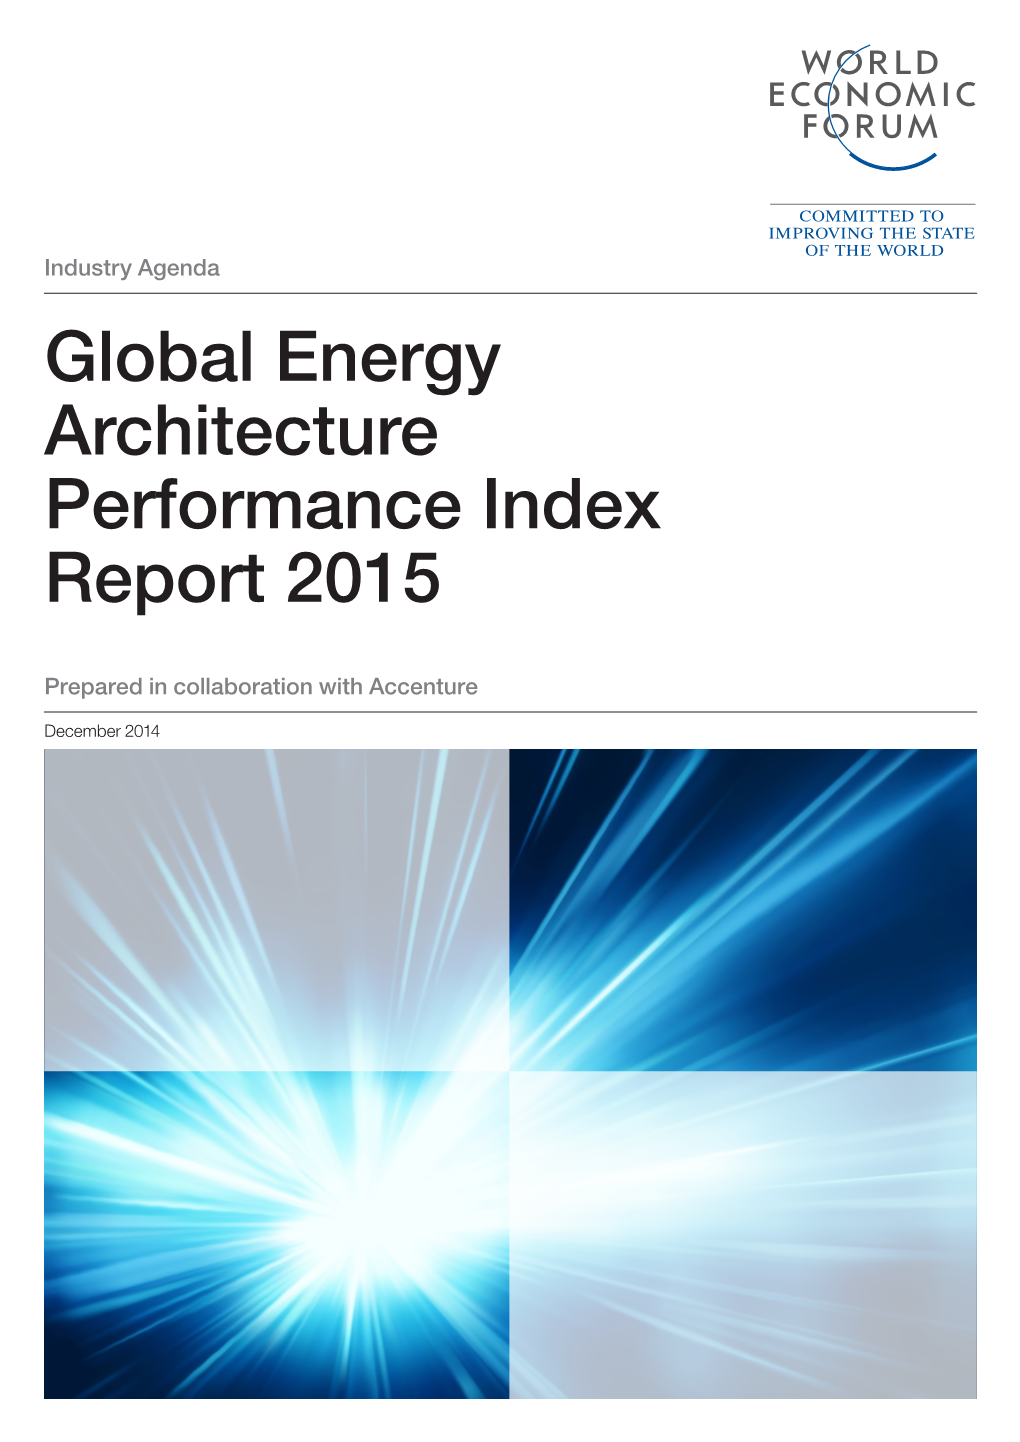 Global Energy Architecture Performance Index Report 2015